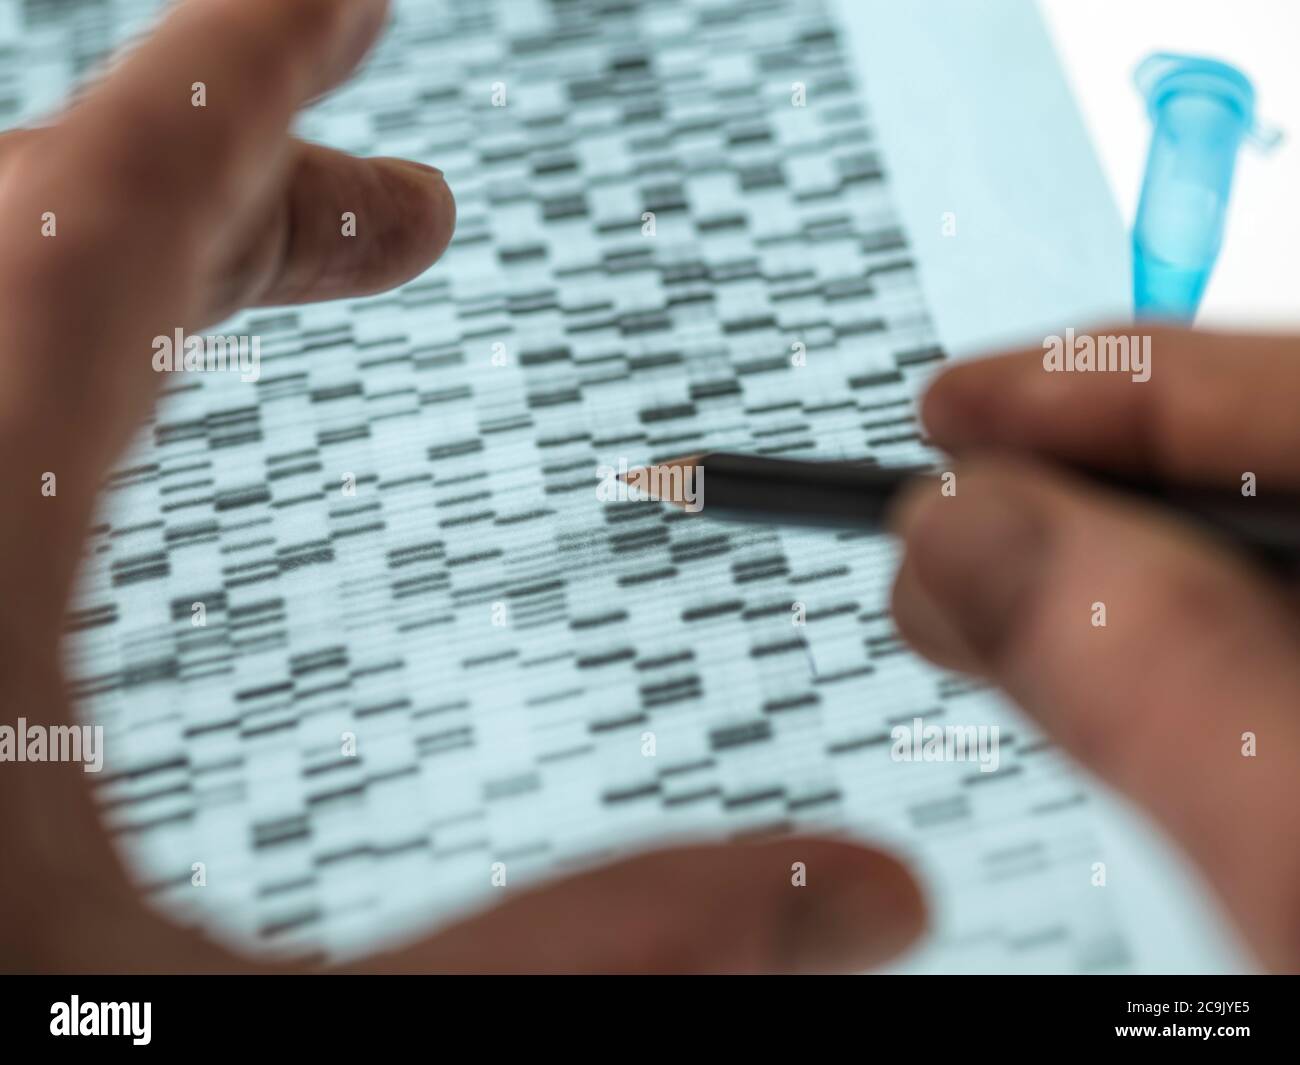 Scientist examining the results of a DNA (deoxyribonucleic acid) autoradiogram gel. Stock Photo